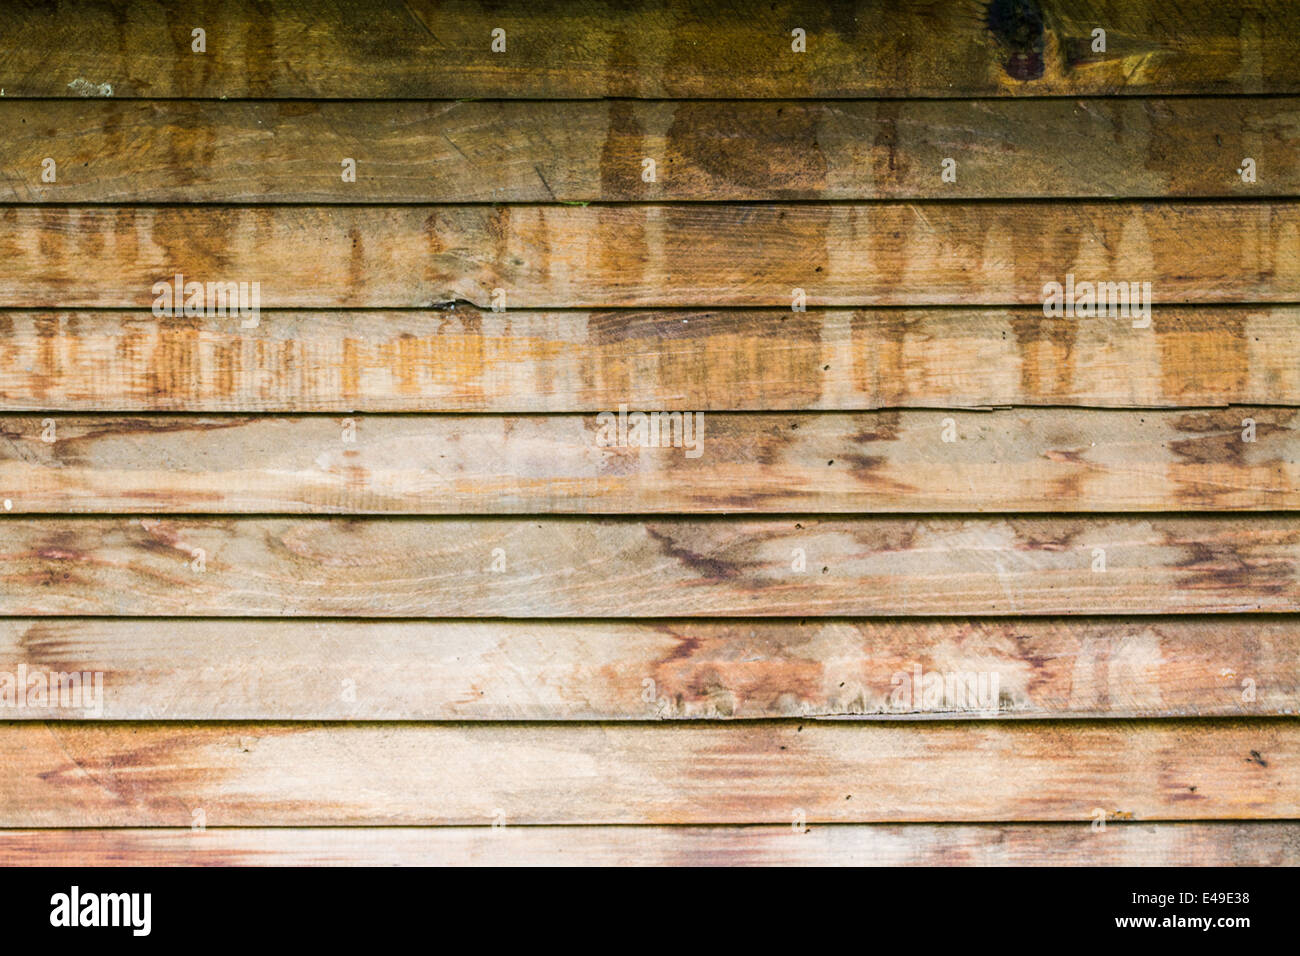 Rusty wooden planks texture for background, natural patina of moisture Stock Photo